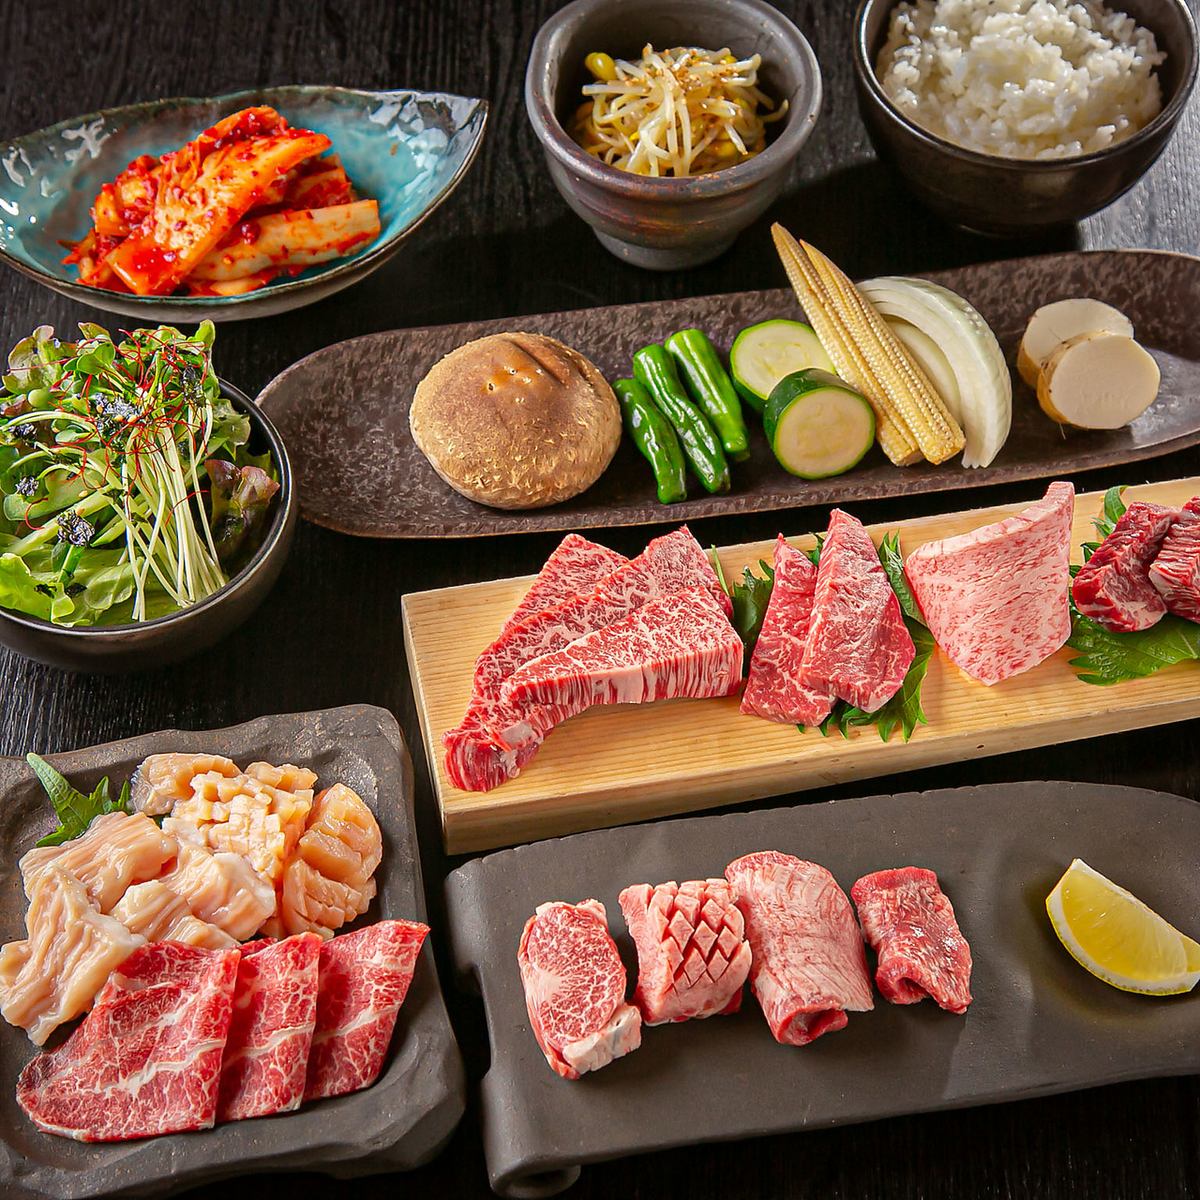 High quality by buying one ◎ Please enjoy the taste of Shimane Japanese beef.